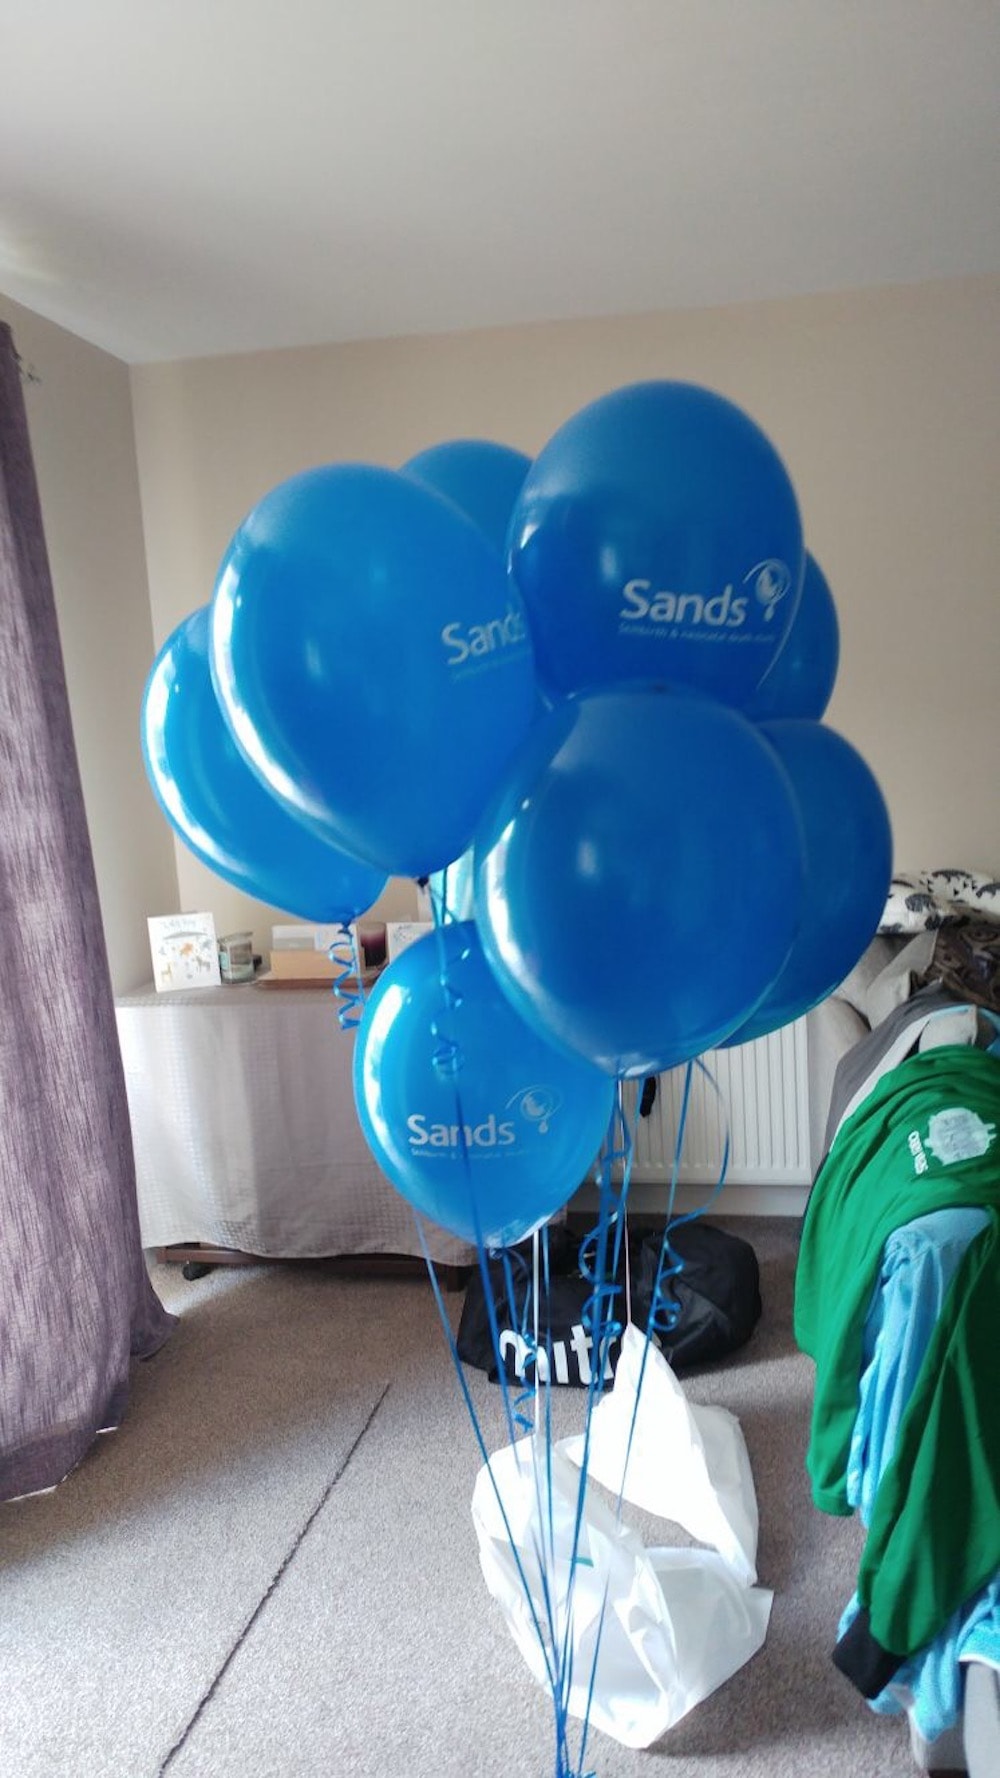 Sands baloons